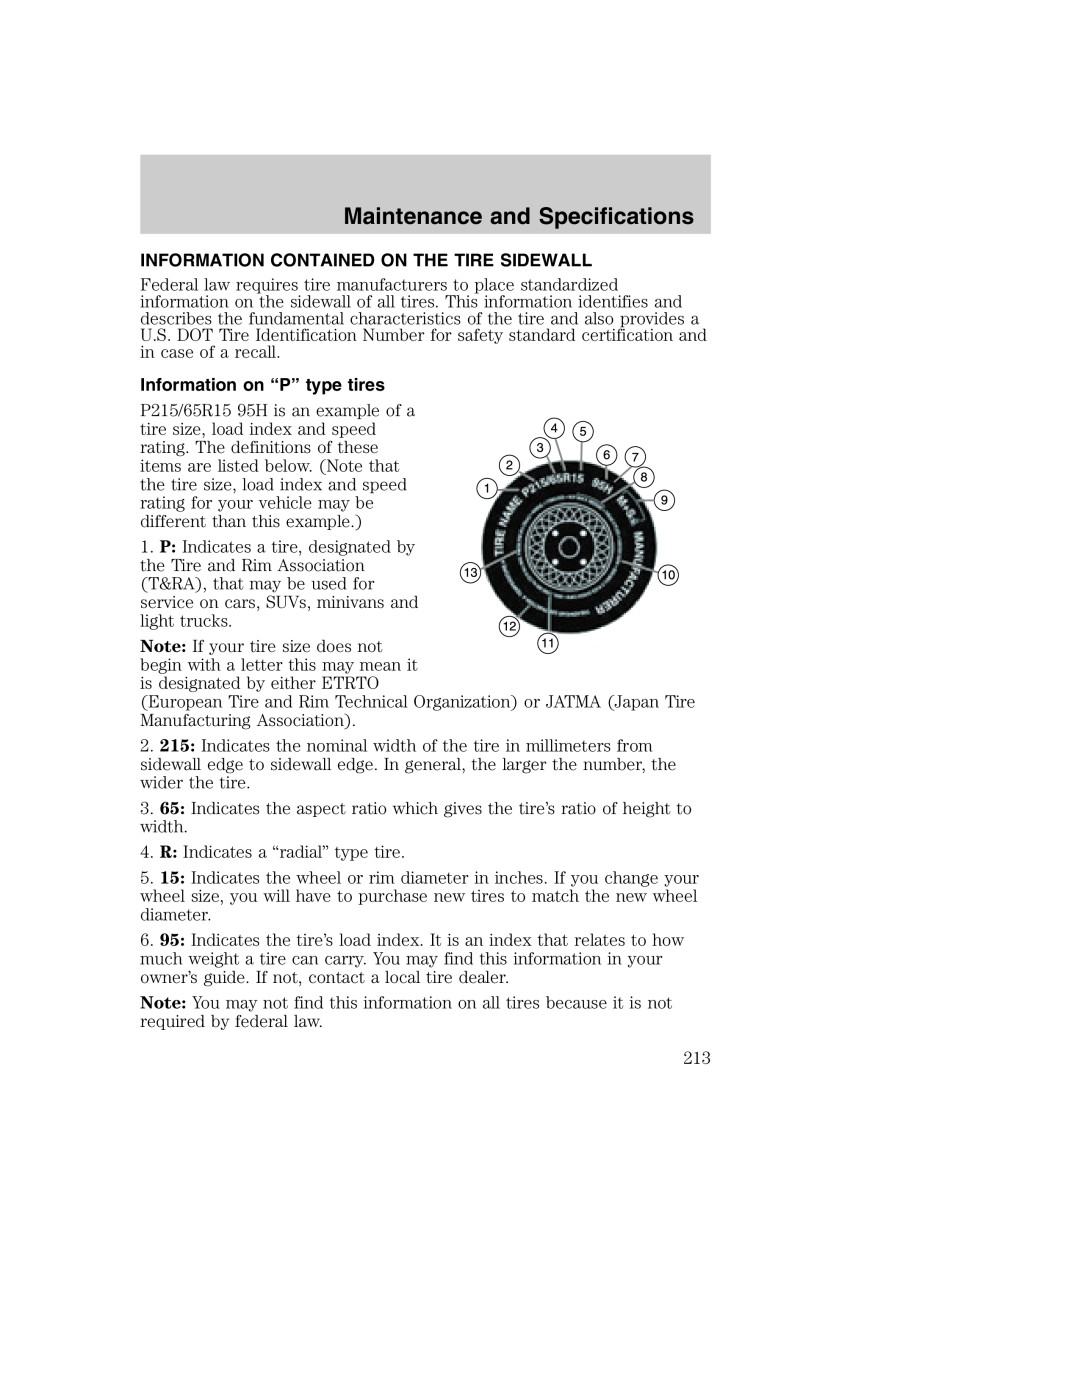 Ford AM/FM stereo manual Information Contained On The Tire Sidewall, Information on “P” type tires 